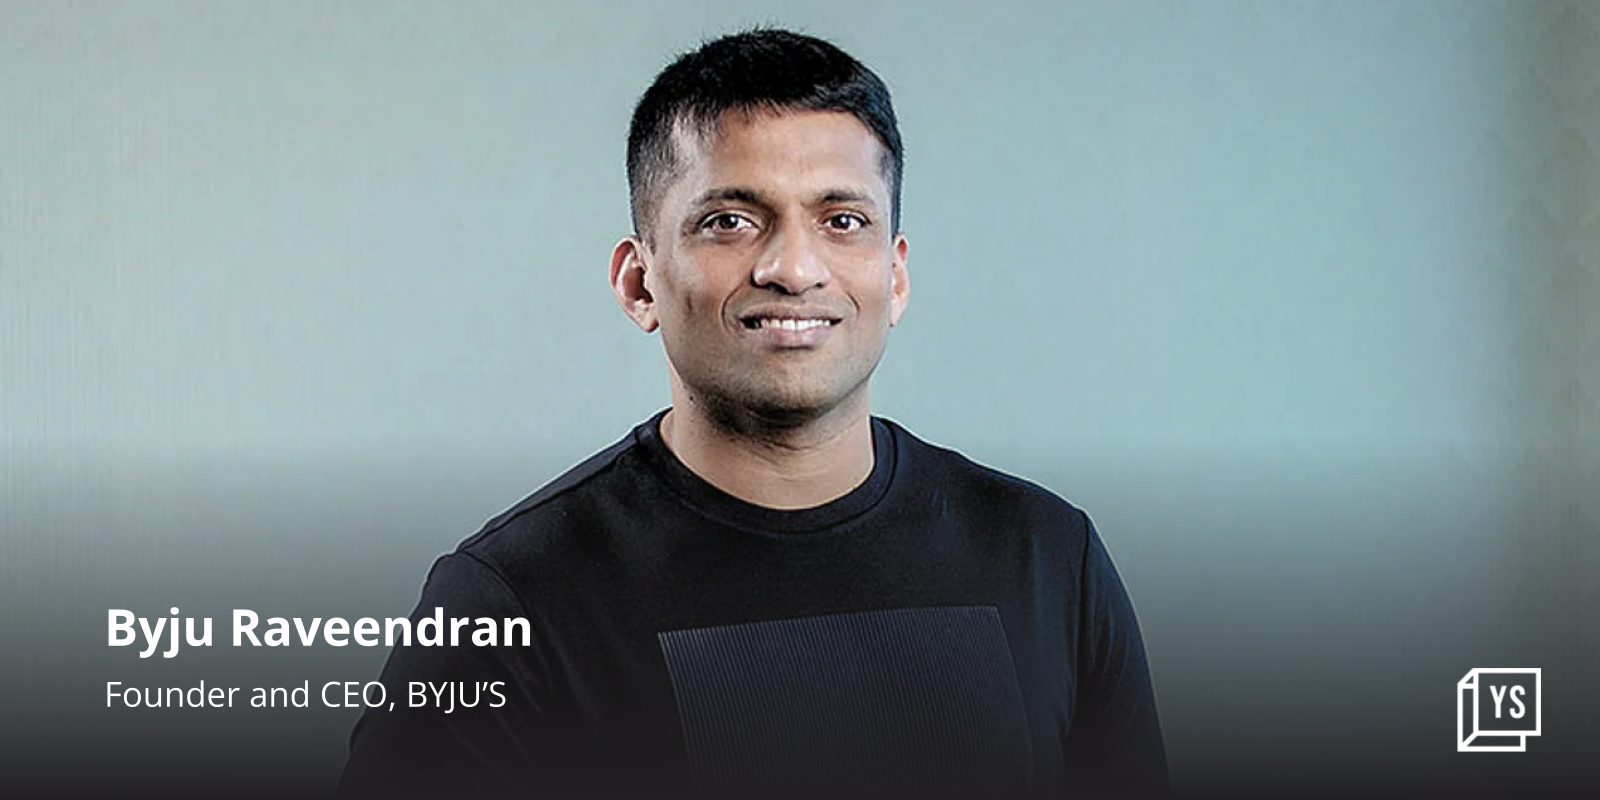 Byju Raveendran addresses BYJU’S’ challenges, expresses optimism for resolution within 3 months